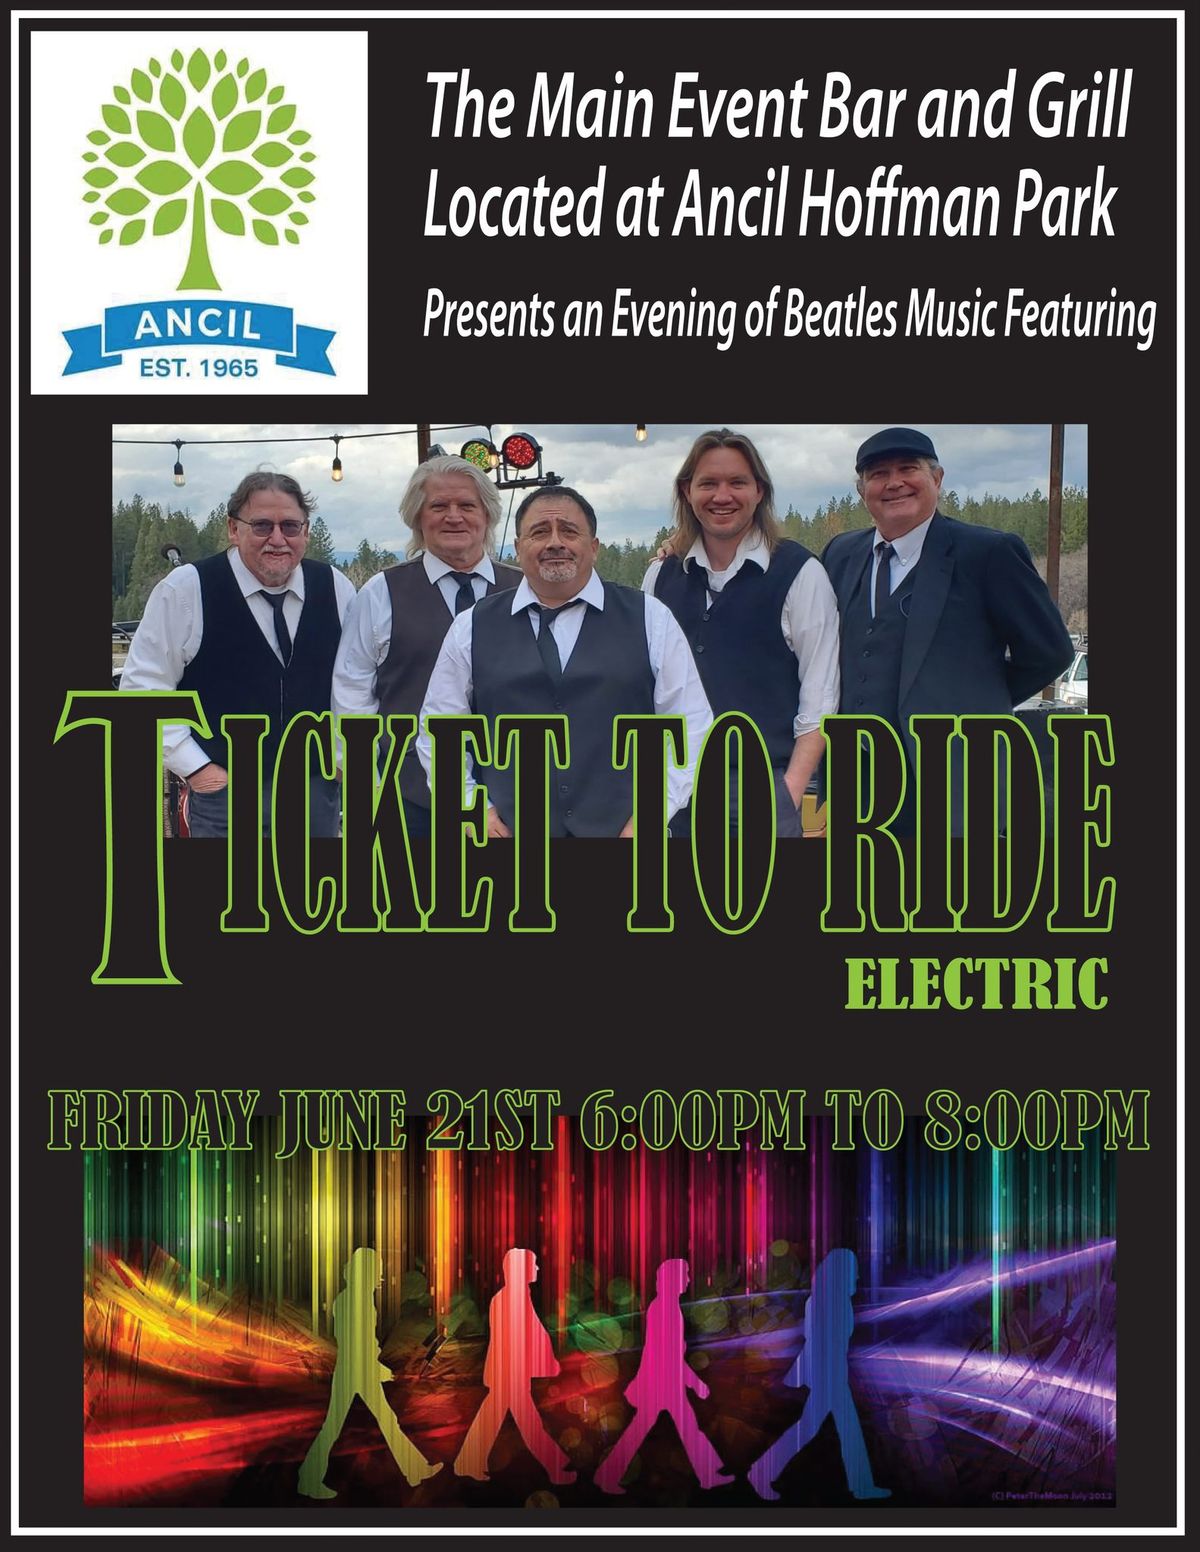 Beatles & Brew!!! Ticket To Ride Electric at Main Event Bar & Grill, 6 to 8 PM, Friday June 21st!